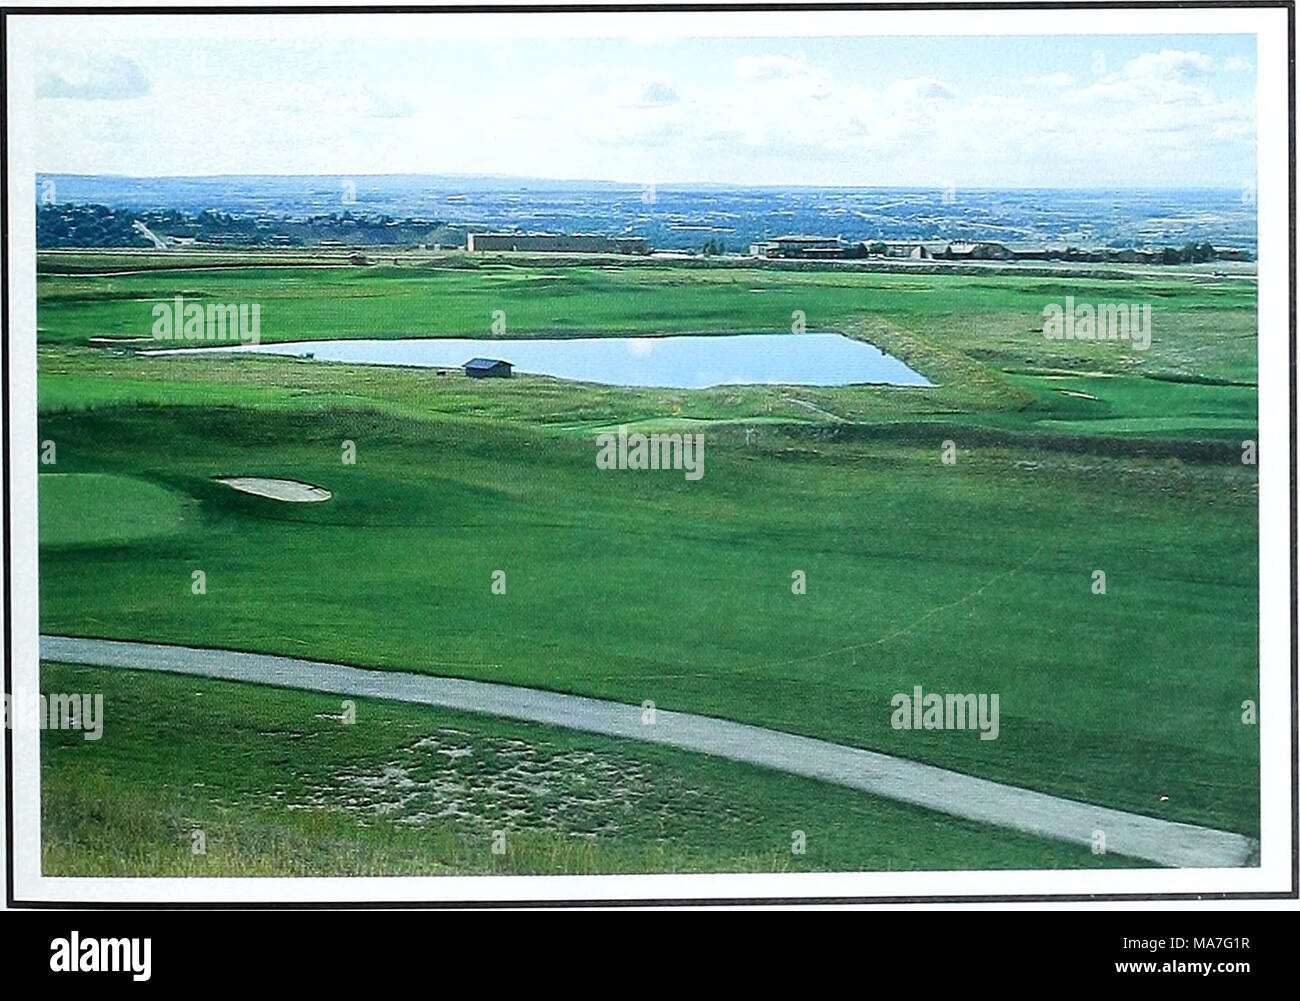 . Eighty years of vegetation and landscape changes in the Northern Great Plains : a photographic record . Synopsis A golf course now occupies this site. The city of Casper can be seen in the distance. In the immediate foreground of the 1998 photo is Agropyron intermedium, which dominates much of the area around the golf course fairways. 71 Stock Photo